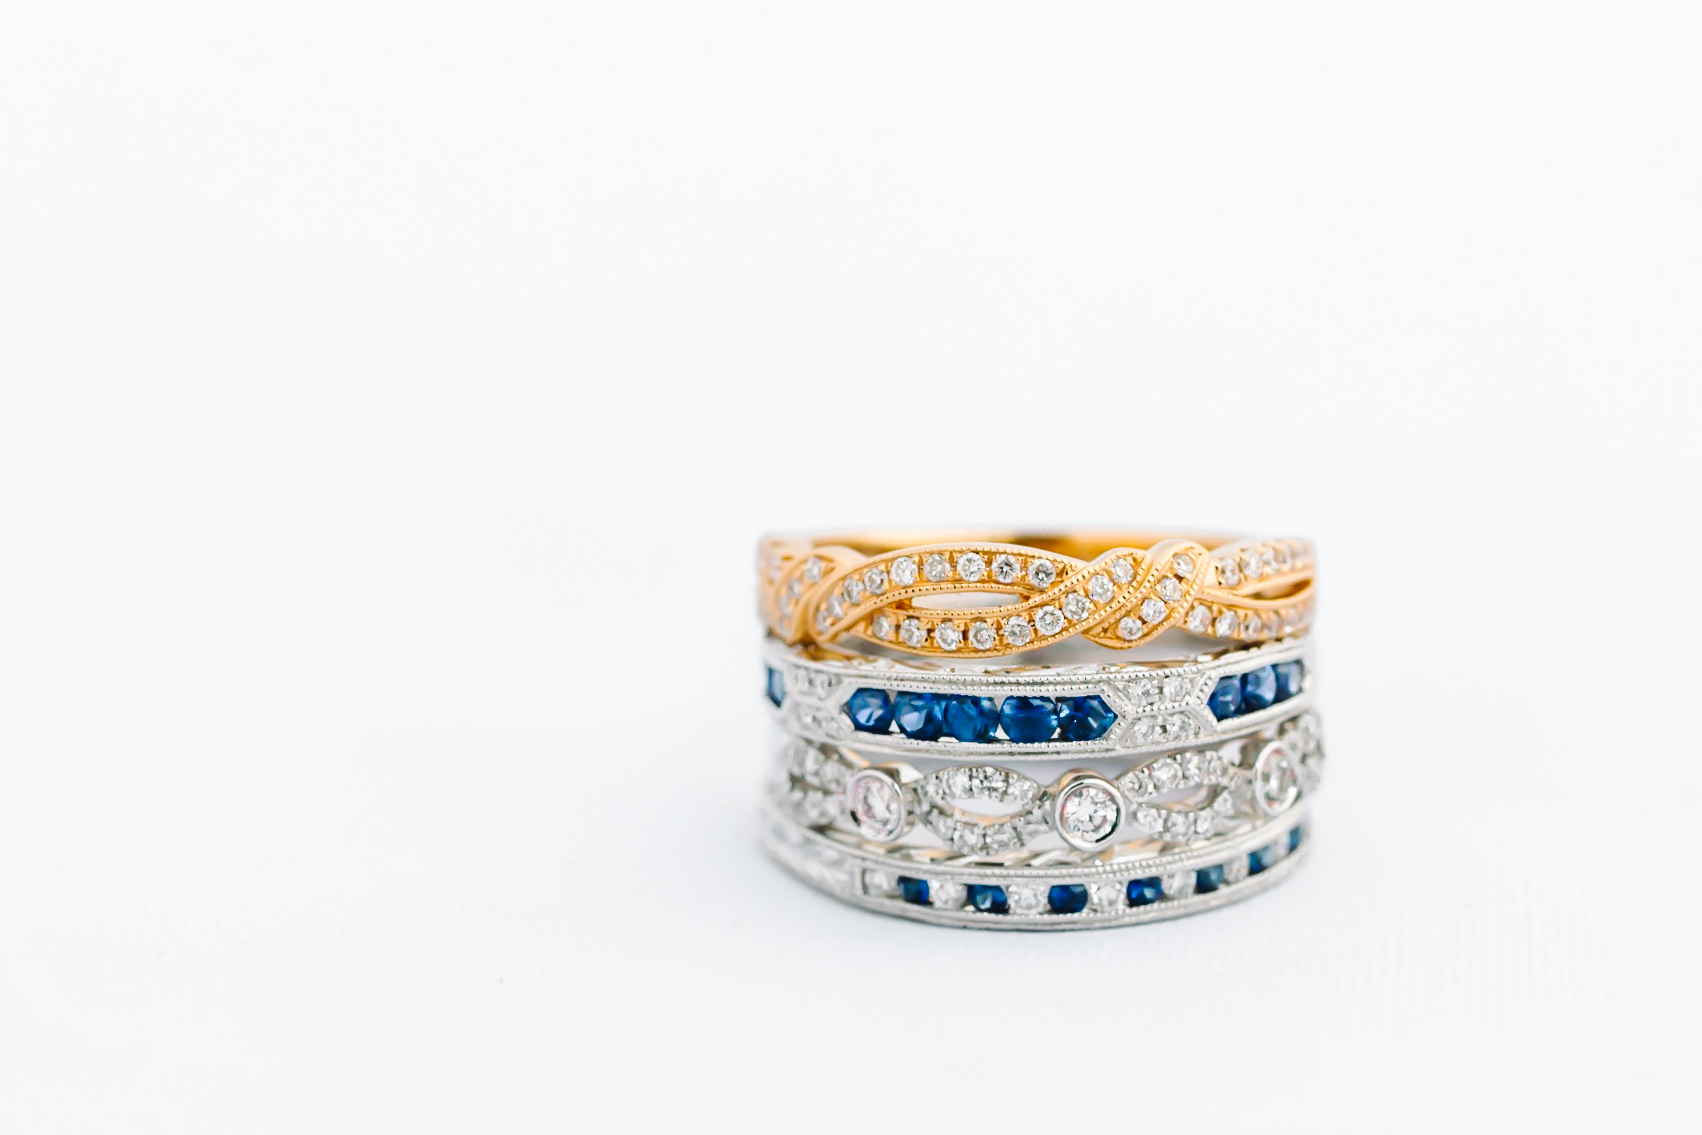 Stack of Kirk Kara yellow and white gold wedding bands, some with sapphires, on a white background